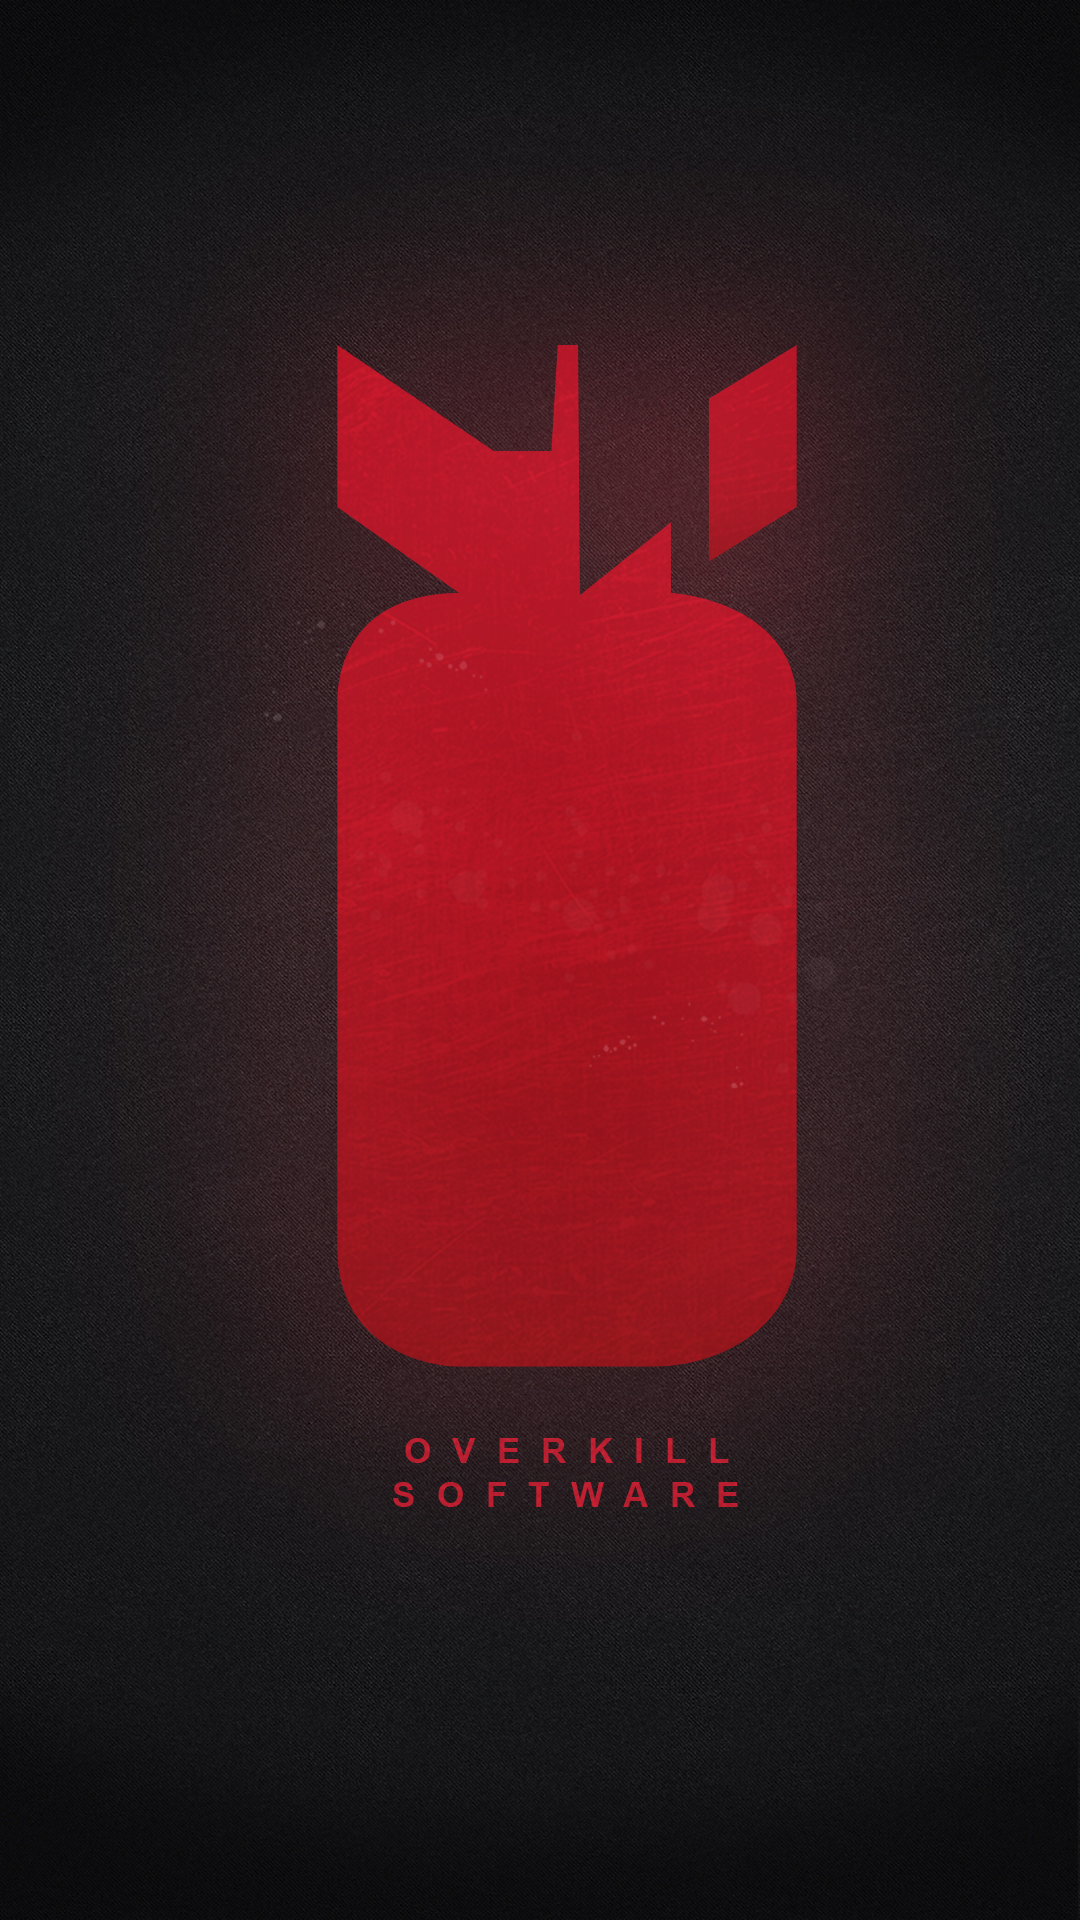 Overkill Software Best Htc One Wallpaper And Easy To